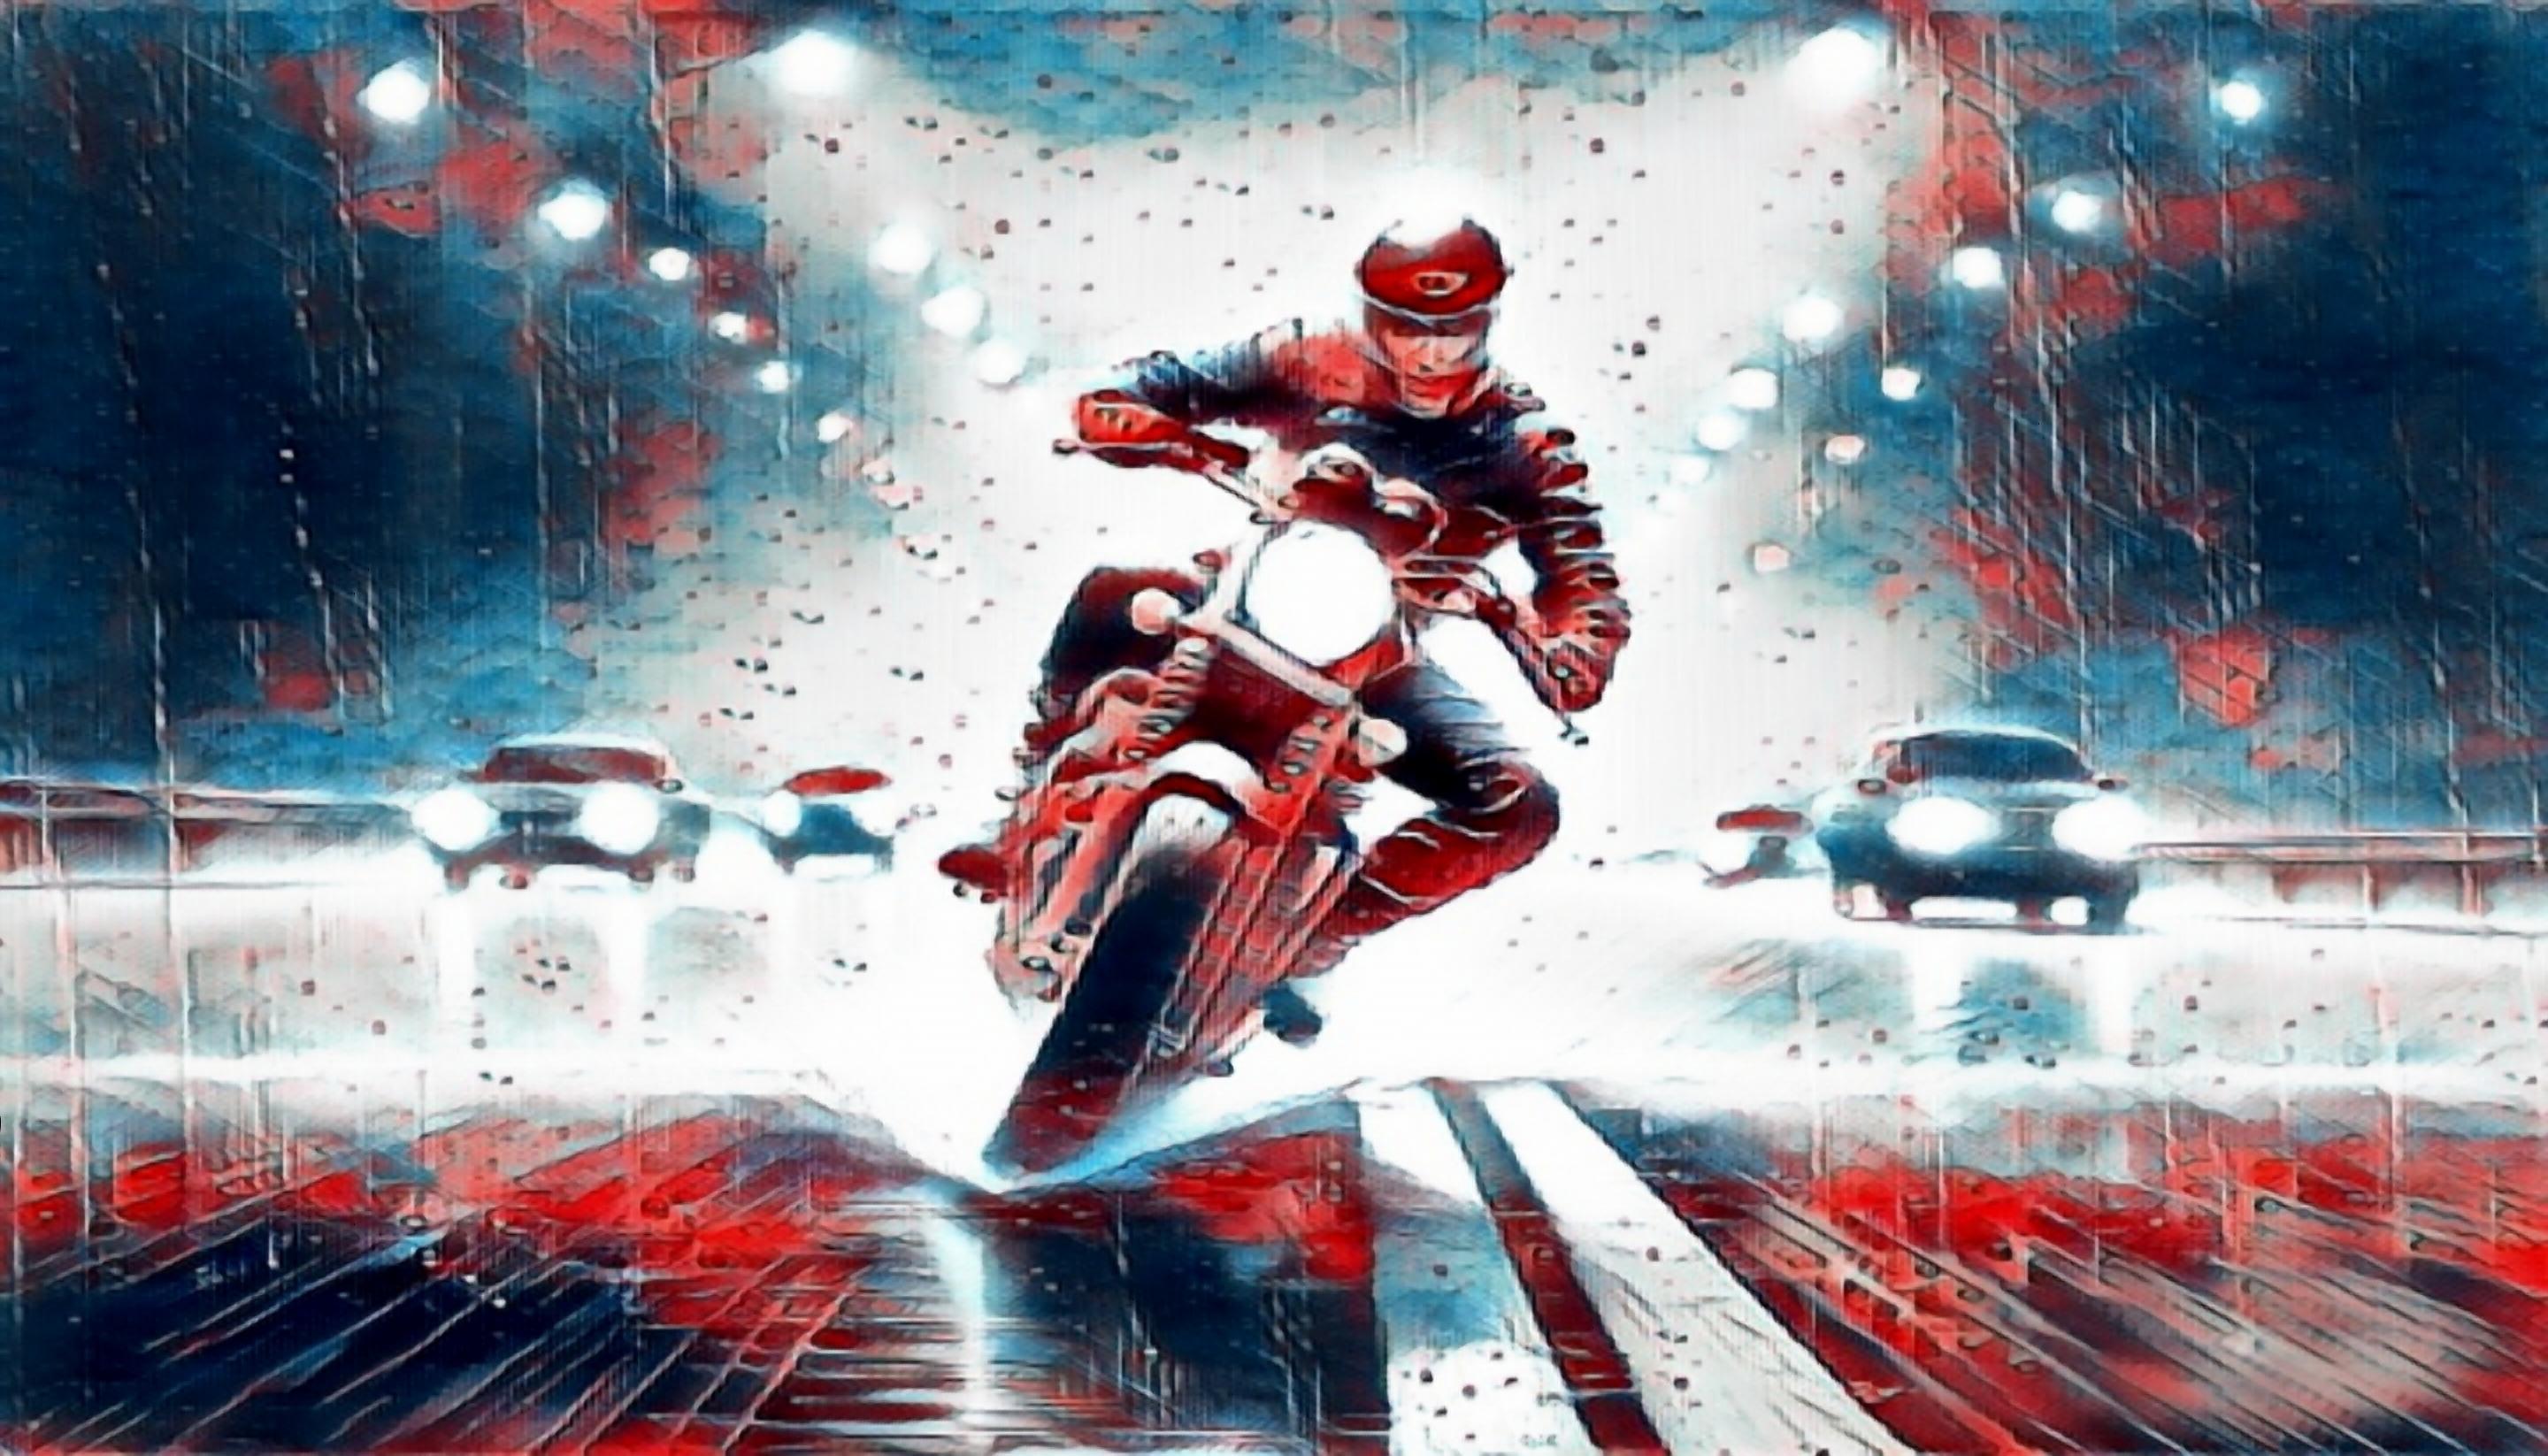 A biker attempting to regain control of their motorcycle while riding in the rain